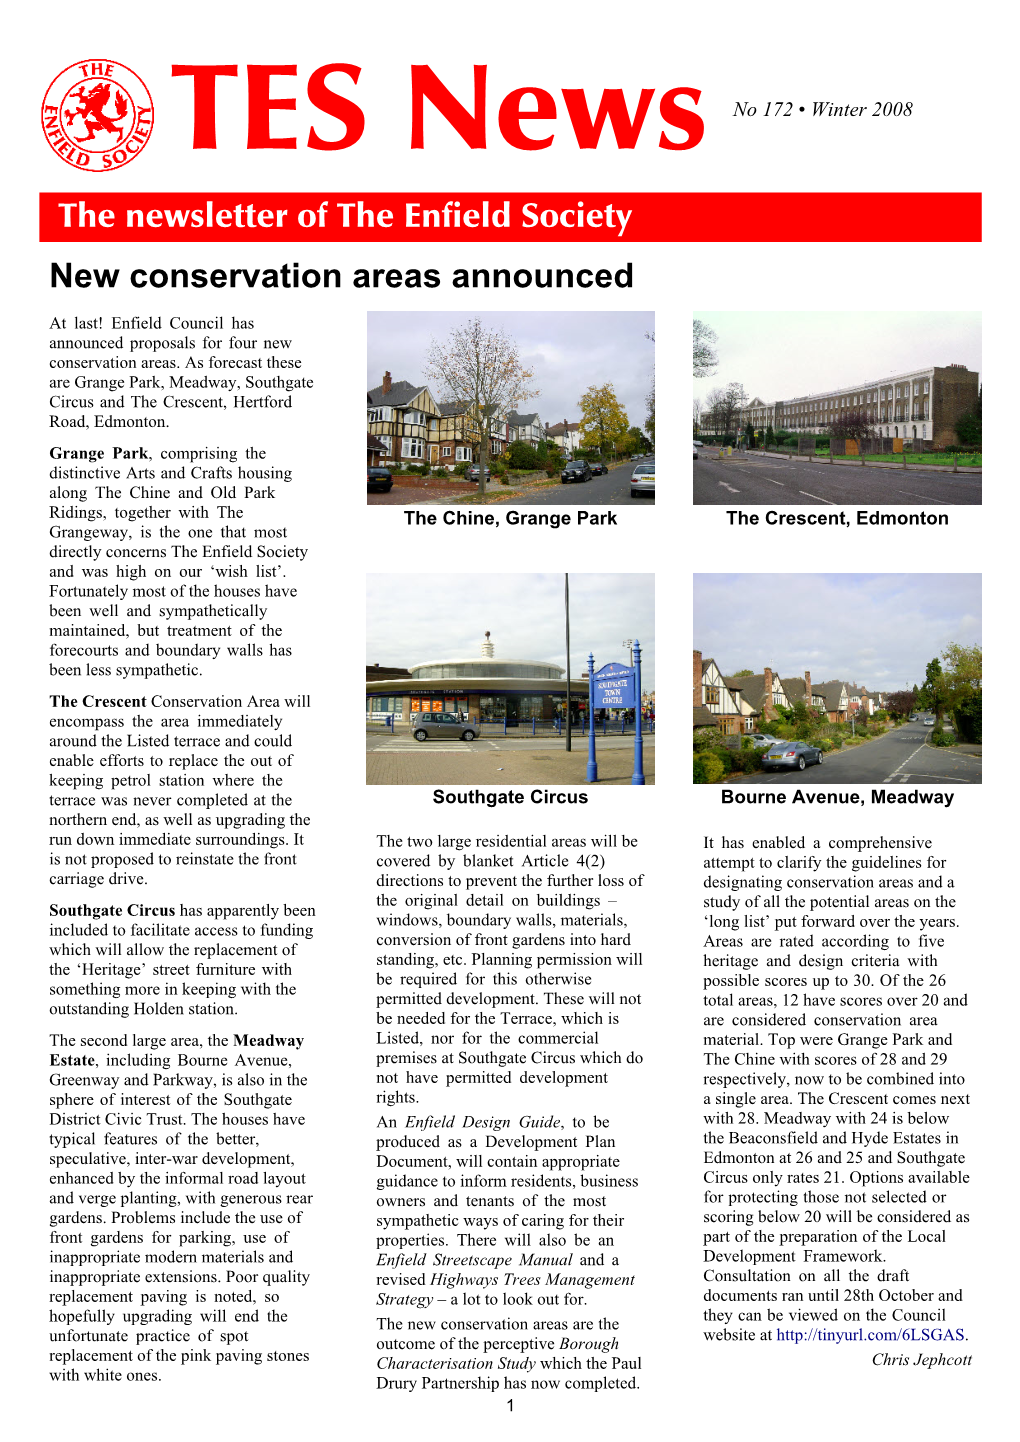 The Newsletter of the Enfield Society New Conservation Areas Announced